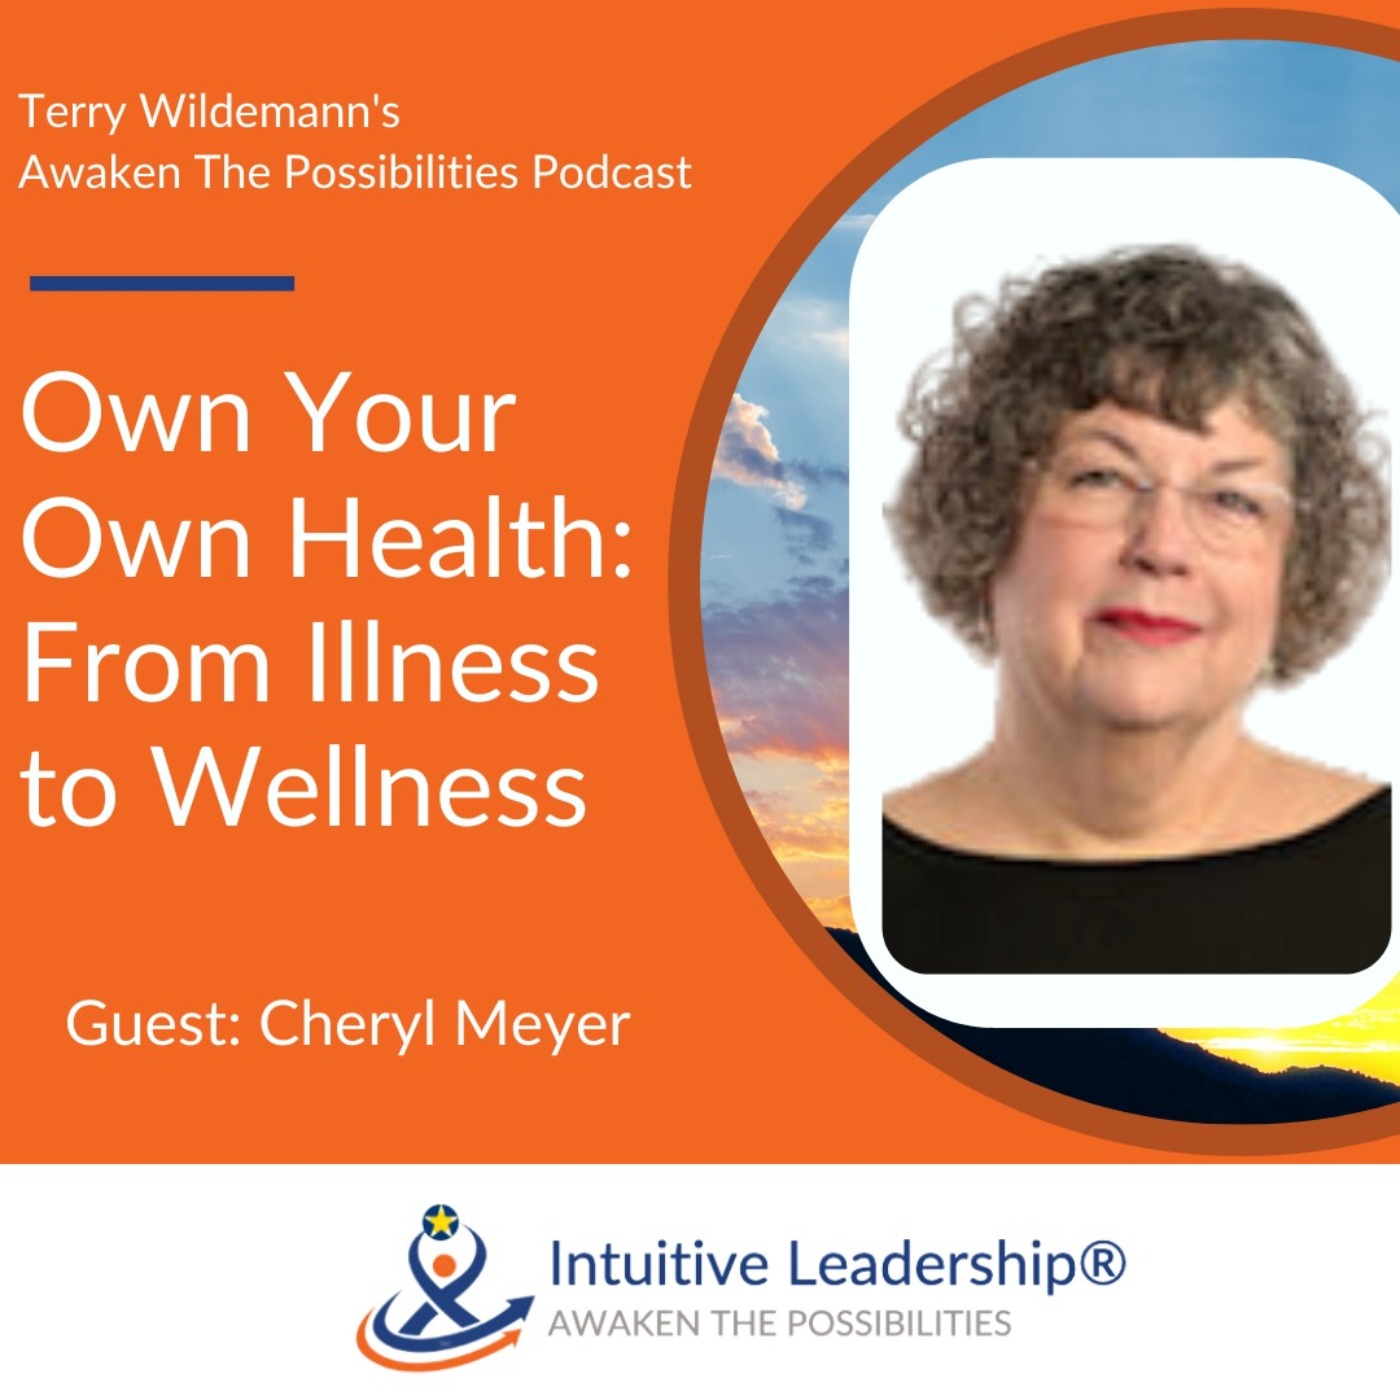 Own You Own Health: From Illness to Wellness